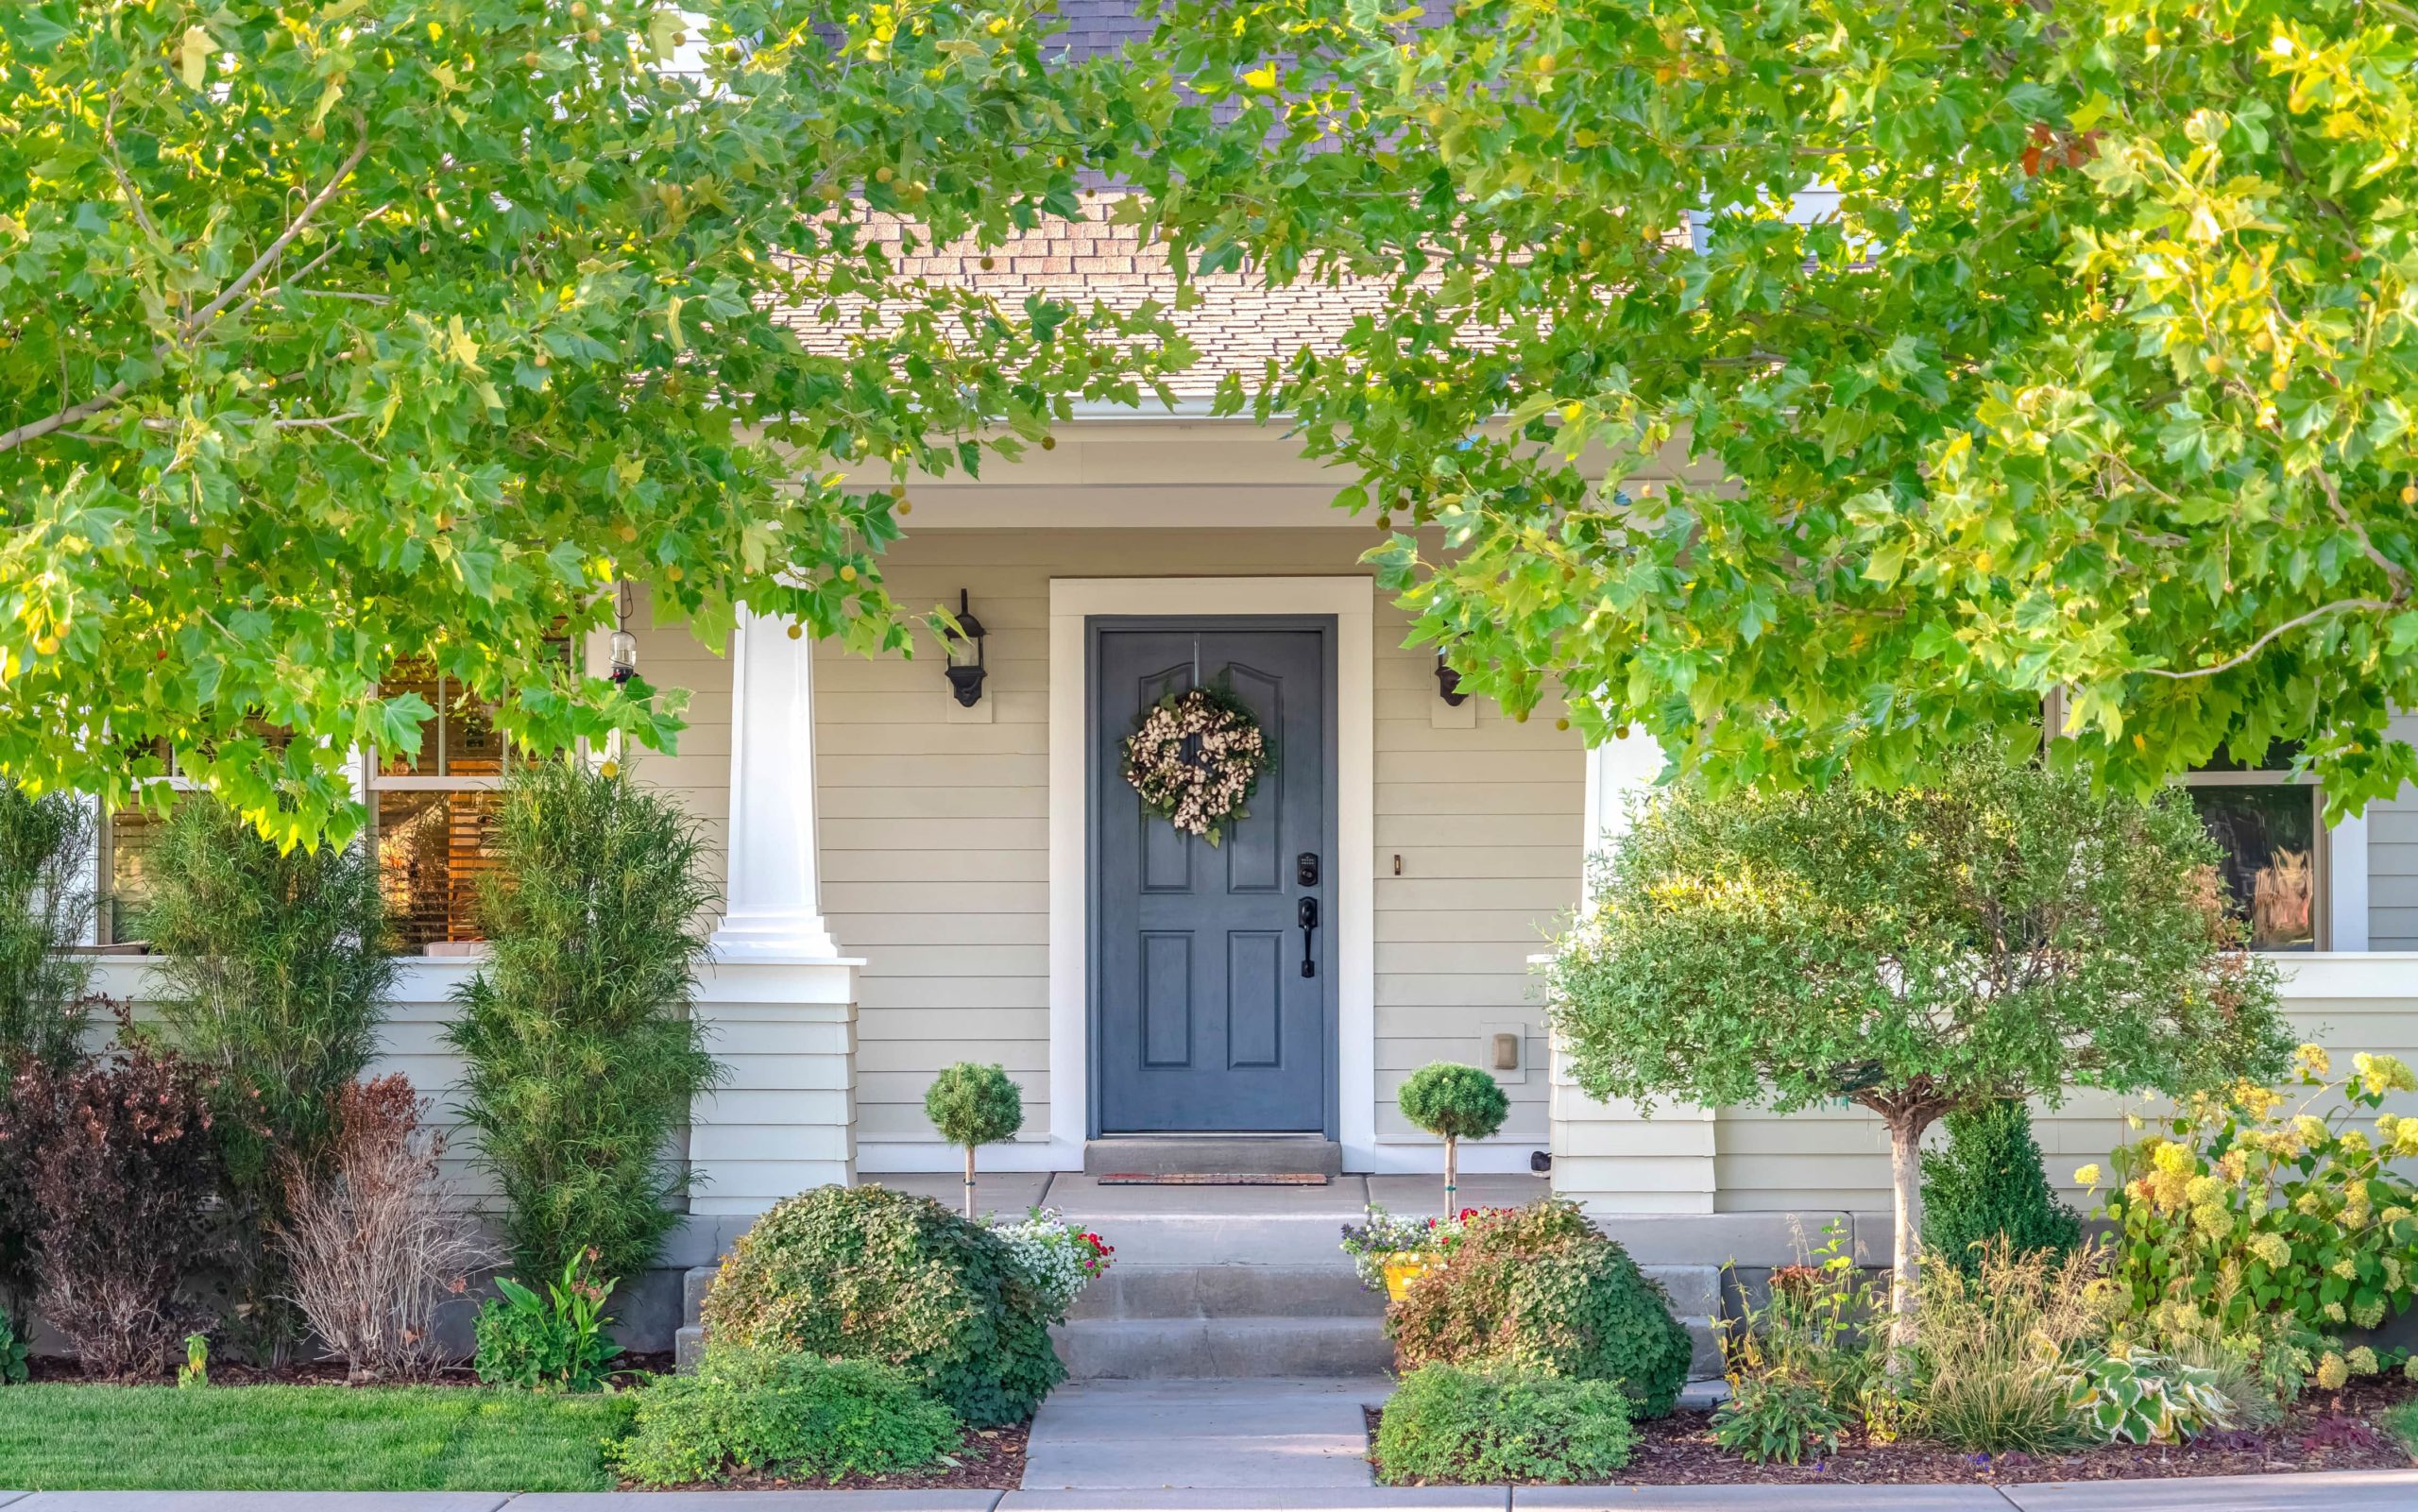 the curb appeal of the front entrance is vital